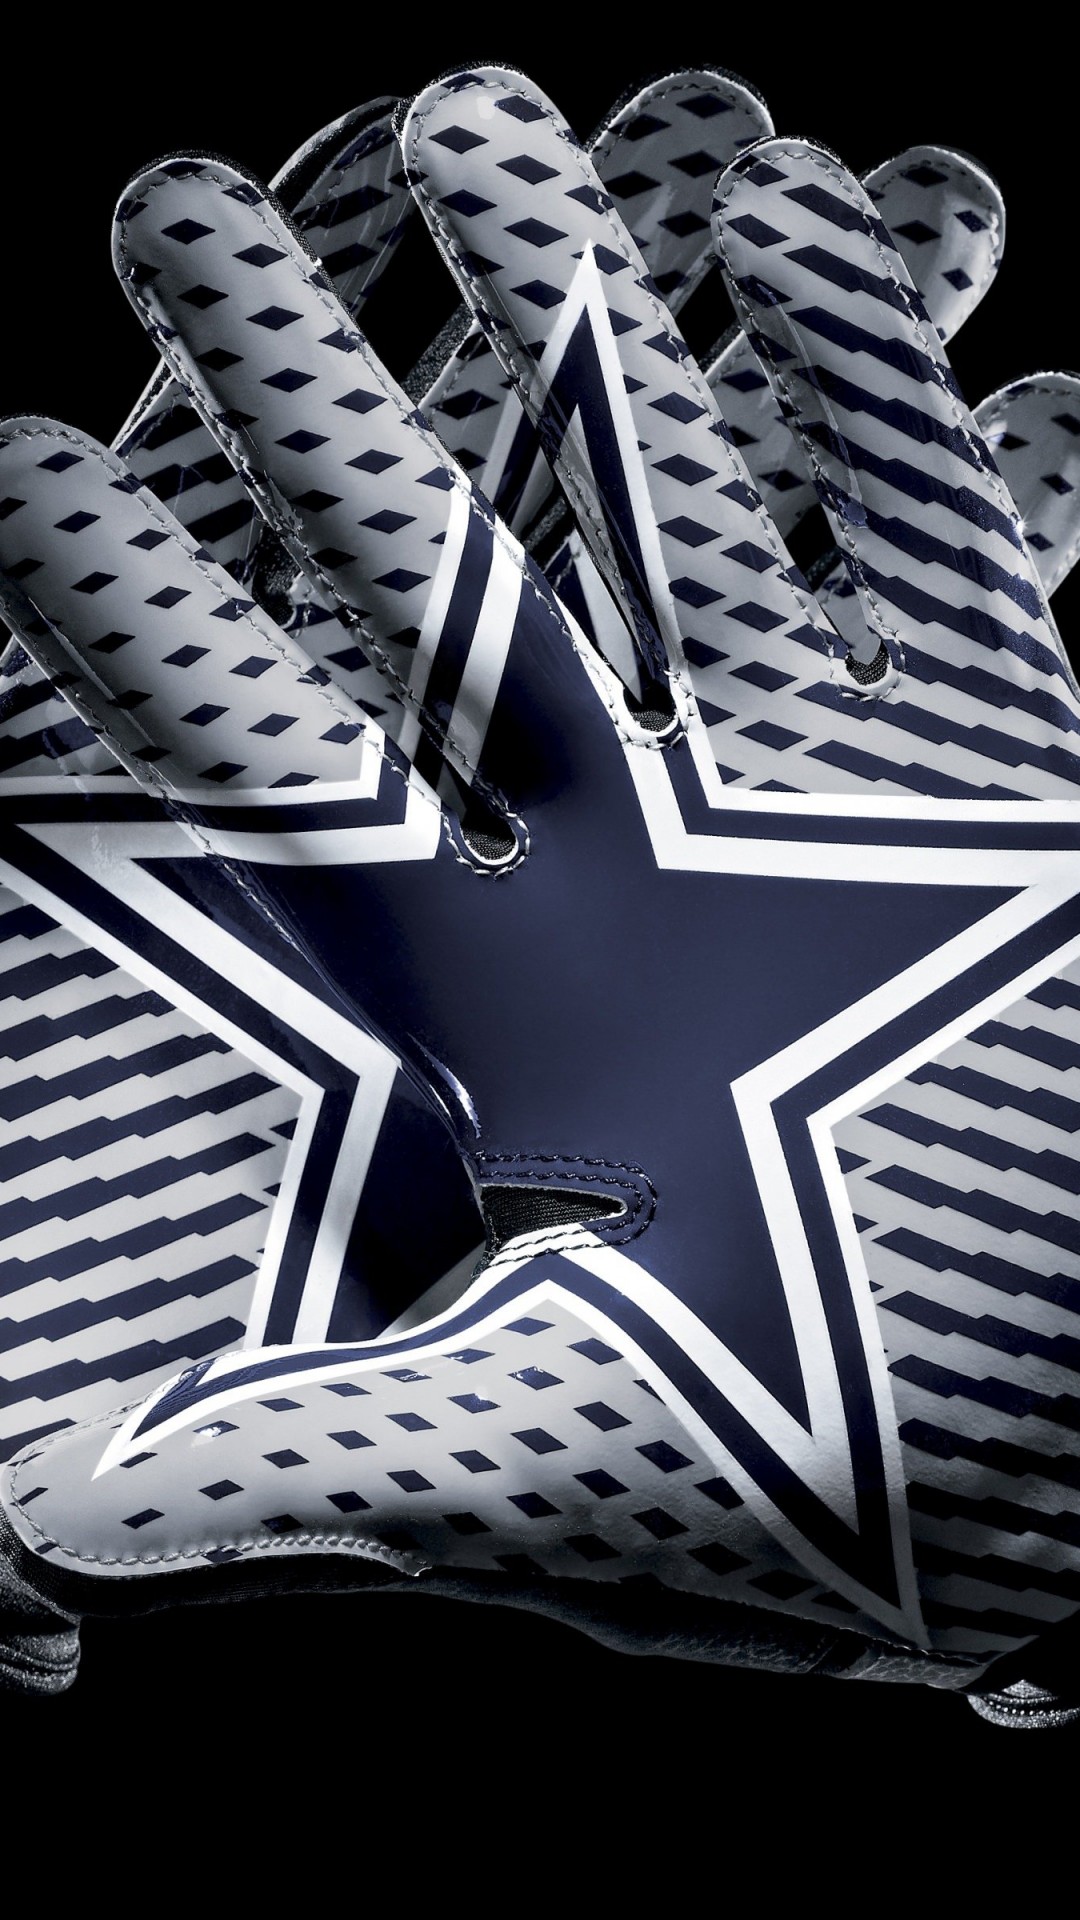 Dallas Cowboys Gloves Wallpaper for HTC One